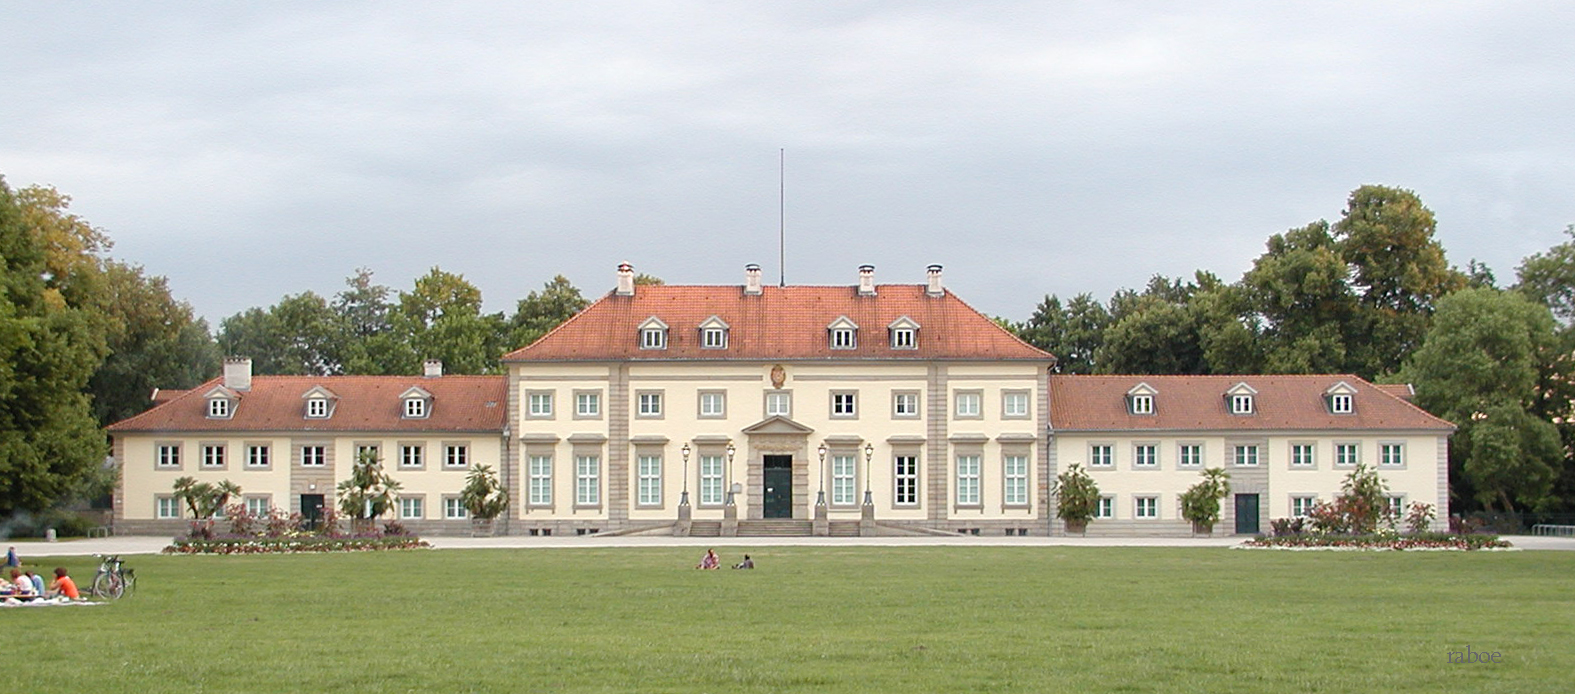 Georgenpalais, now Wilhelm Busch museum in Hanover, Germany